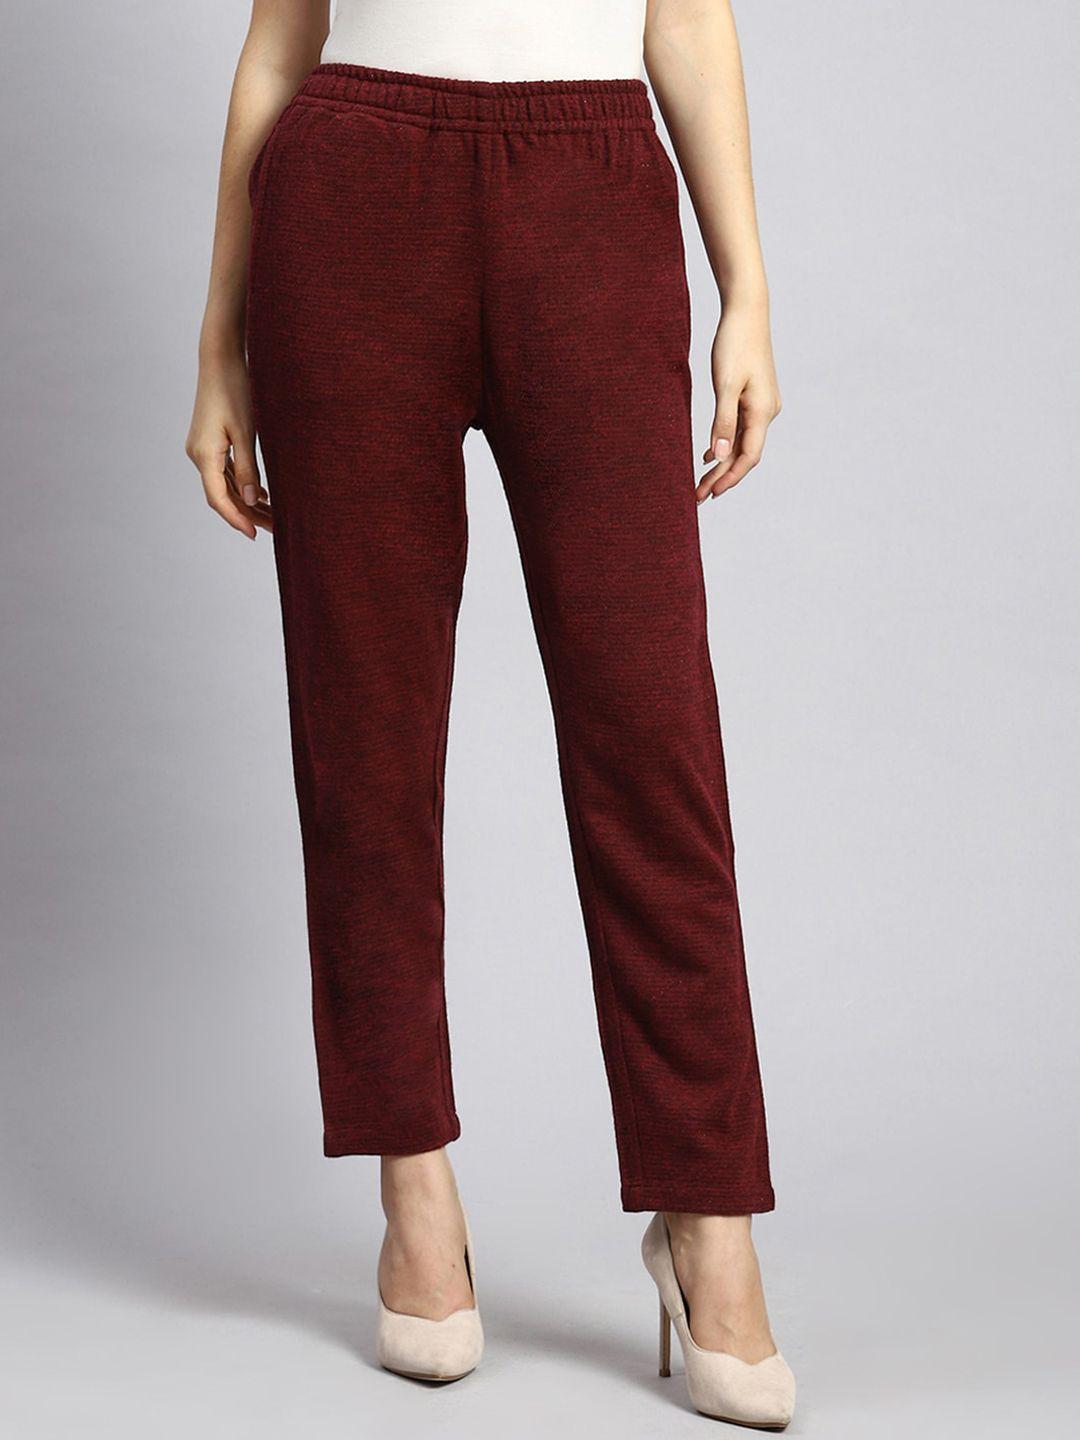 monte carlo women mid-rise textured trousers